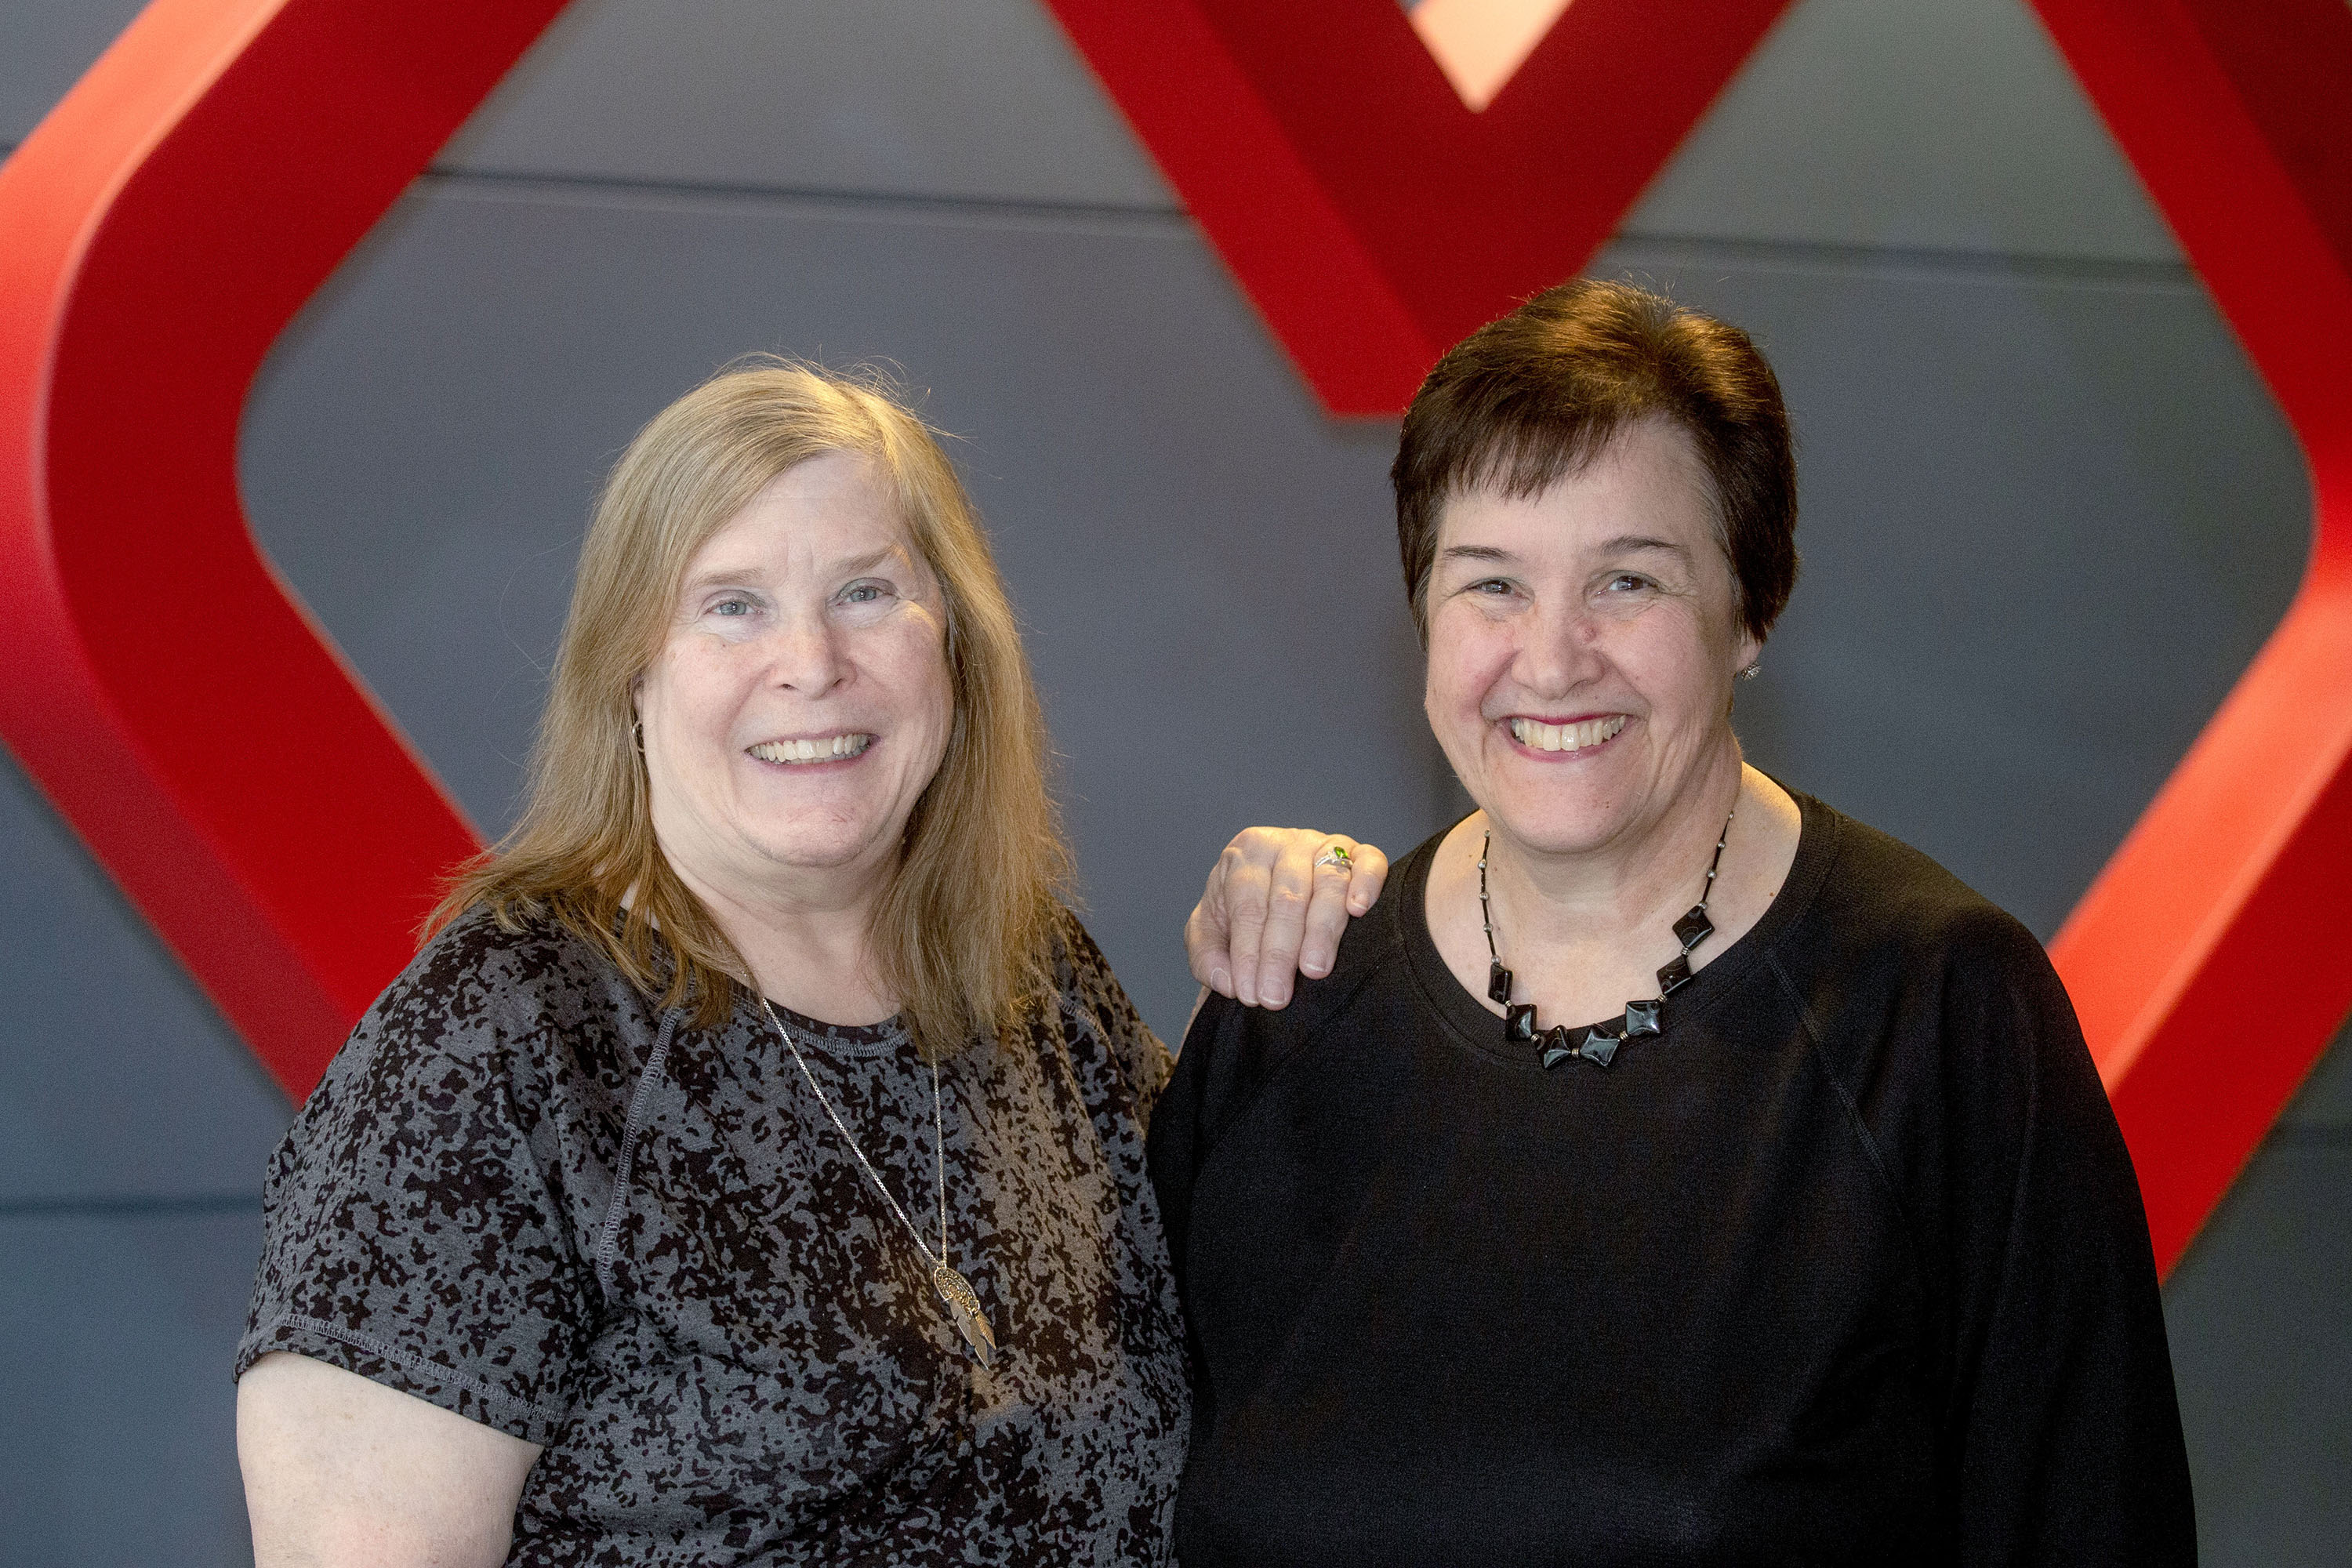 CVS Heart at Work: The Cannon Sisters